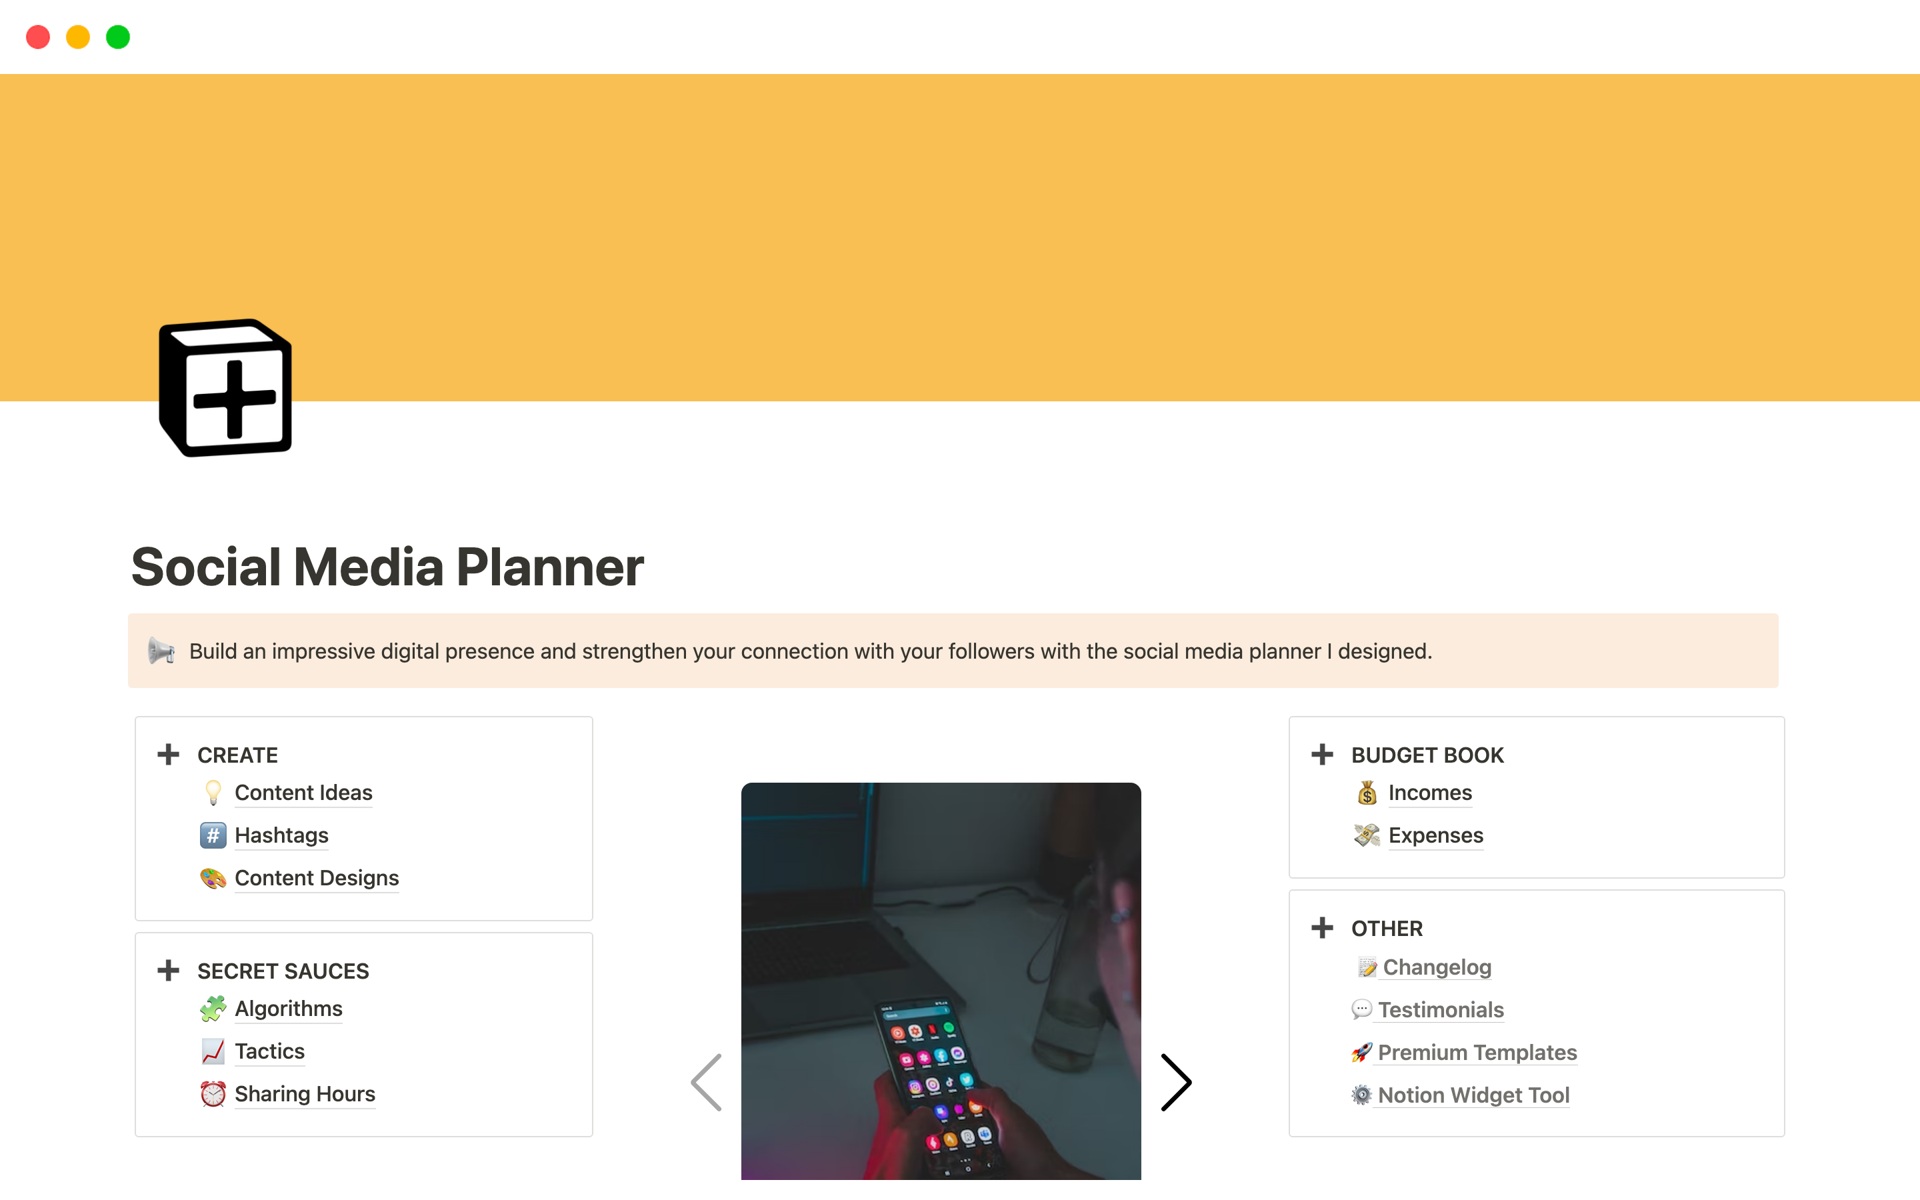 15 different social media planners including ProductHunt, IndieHackers, and HackerNews